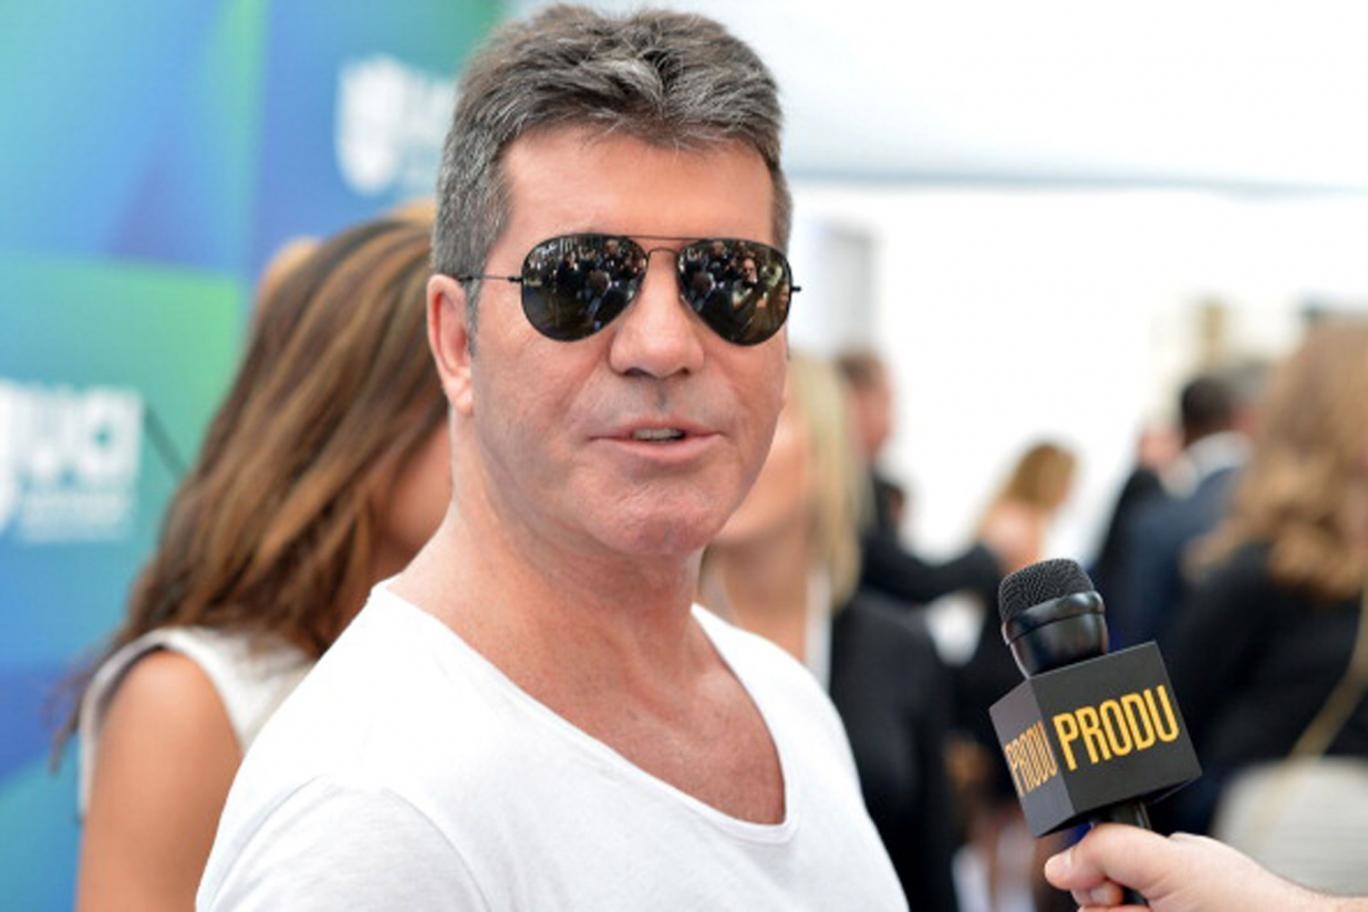 Simon Cowell performs some serious tree climbing each and every day.